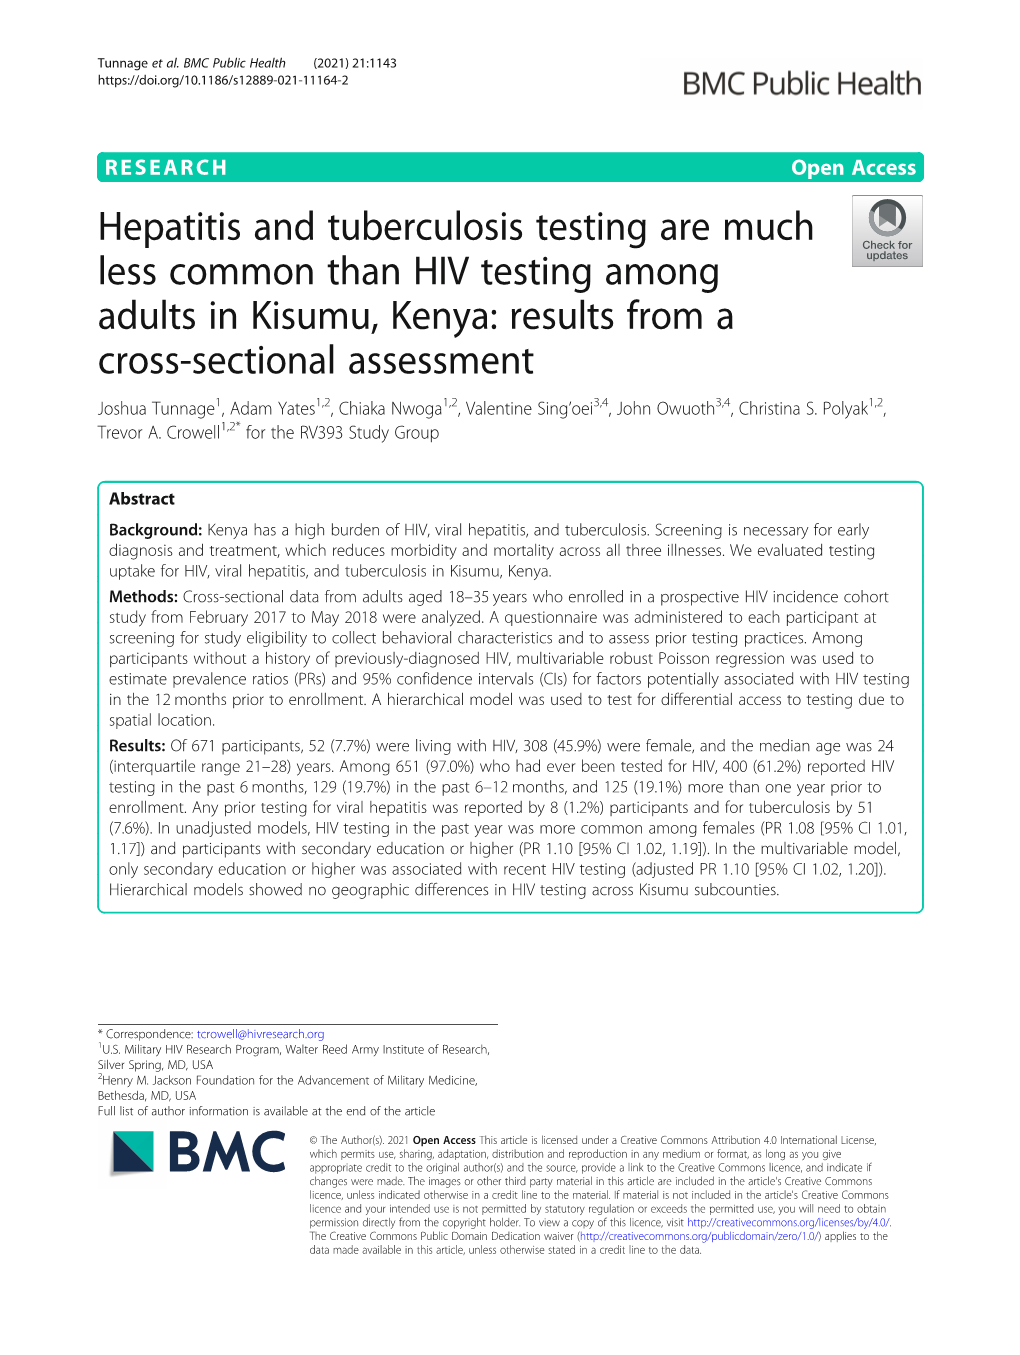 Hepatitis and Tuberculosis Testing Are Much Less Common Than HIV Testing Among Adults in Kisumu, Kenya